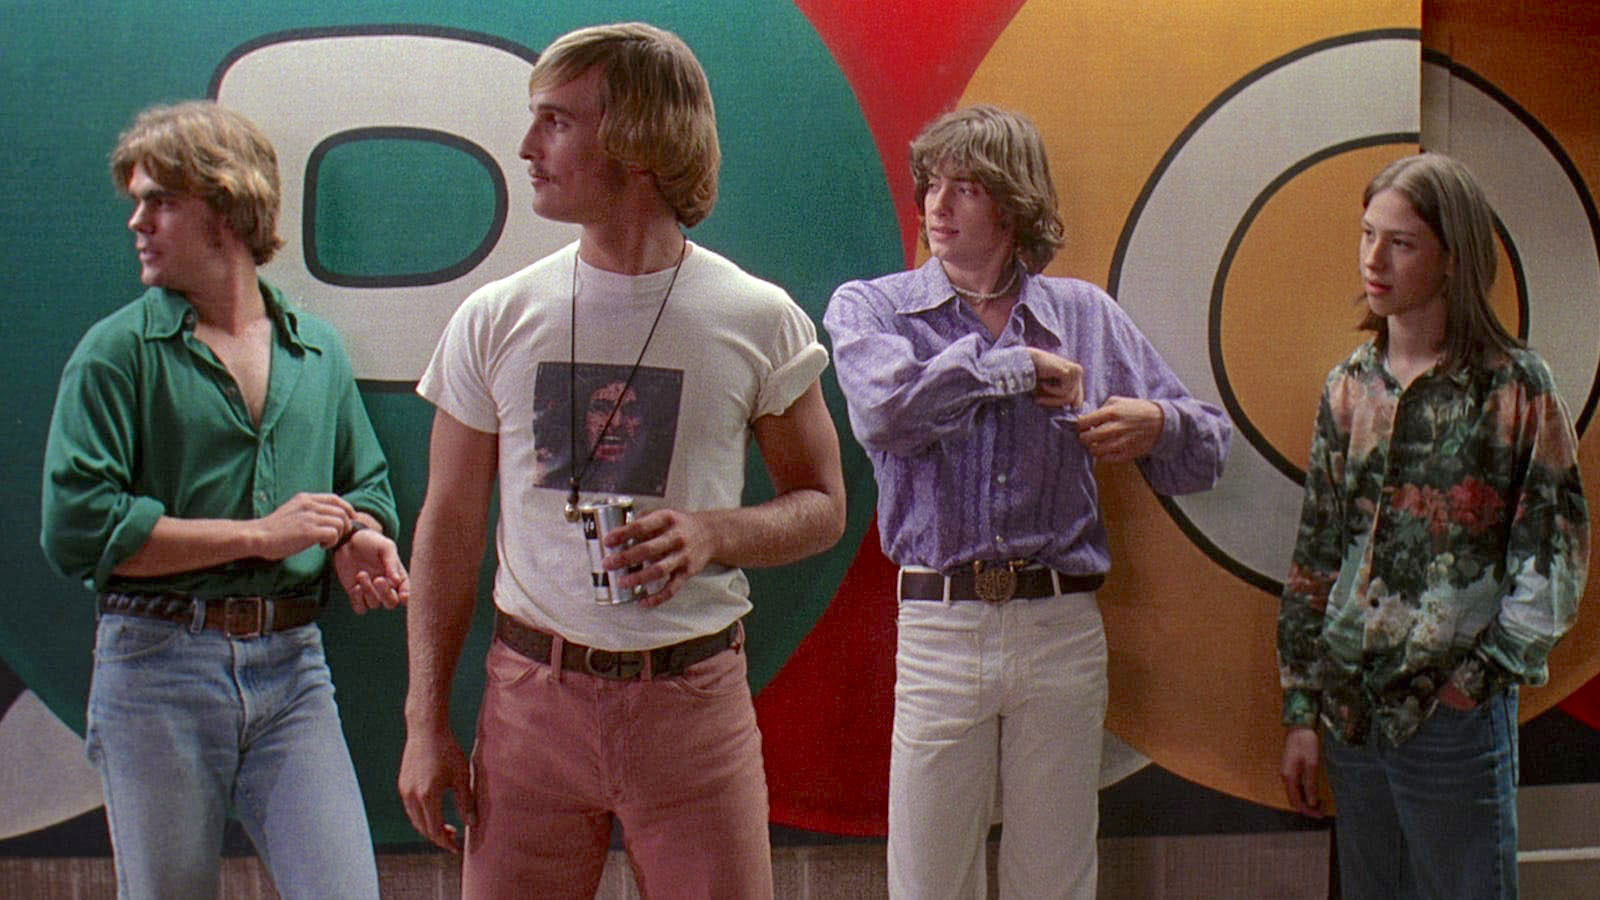 A Future Oscar Winner Had A Dazed And Confused Cameo You Might Have Missed